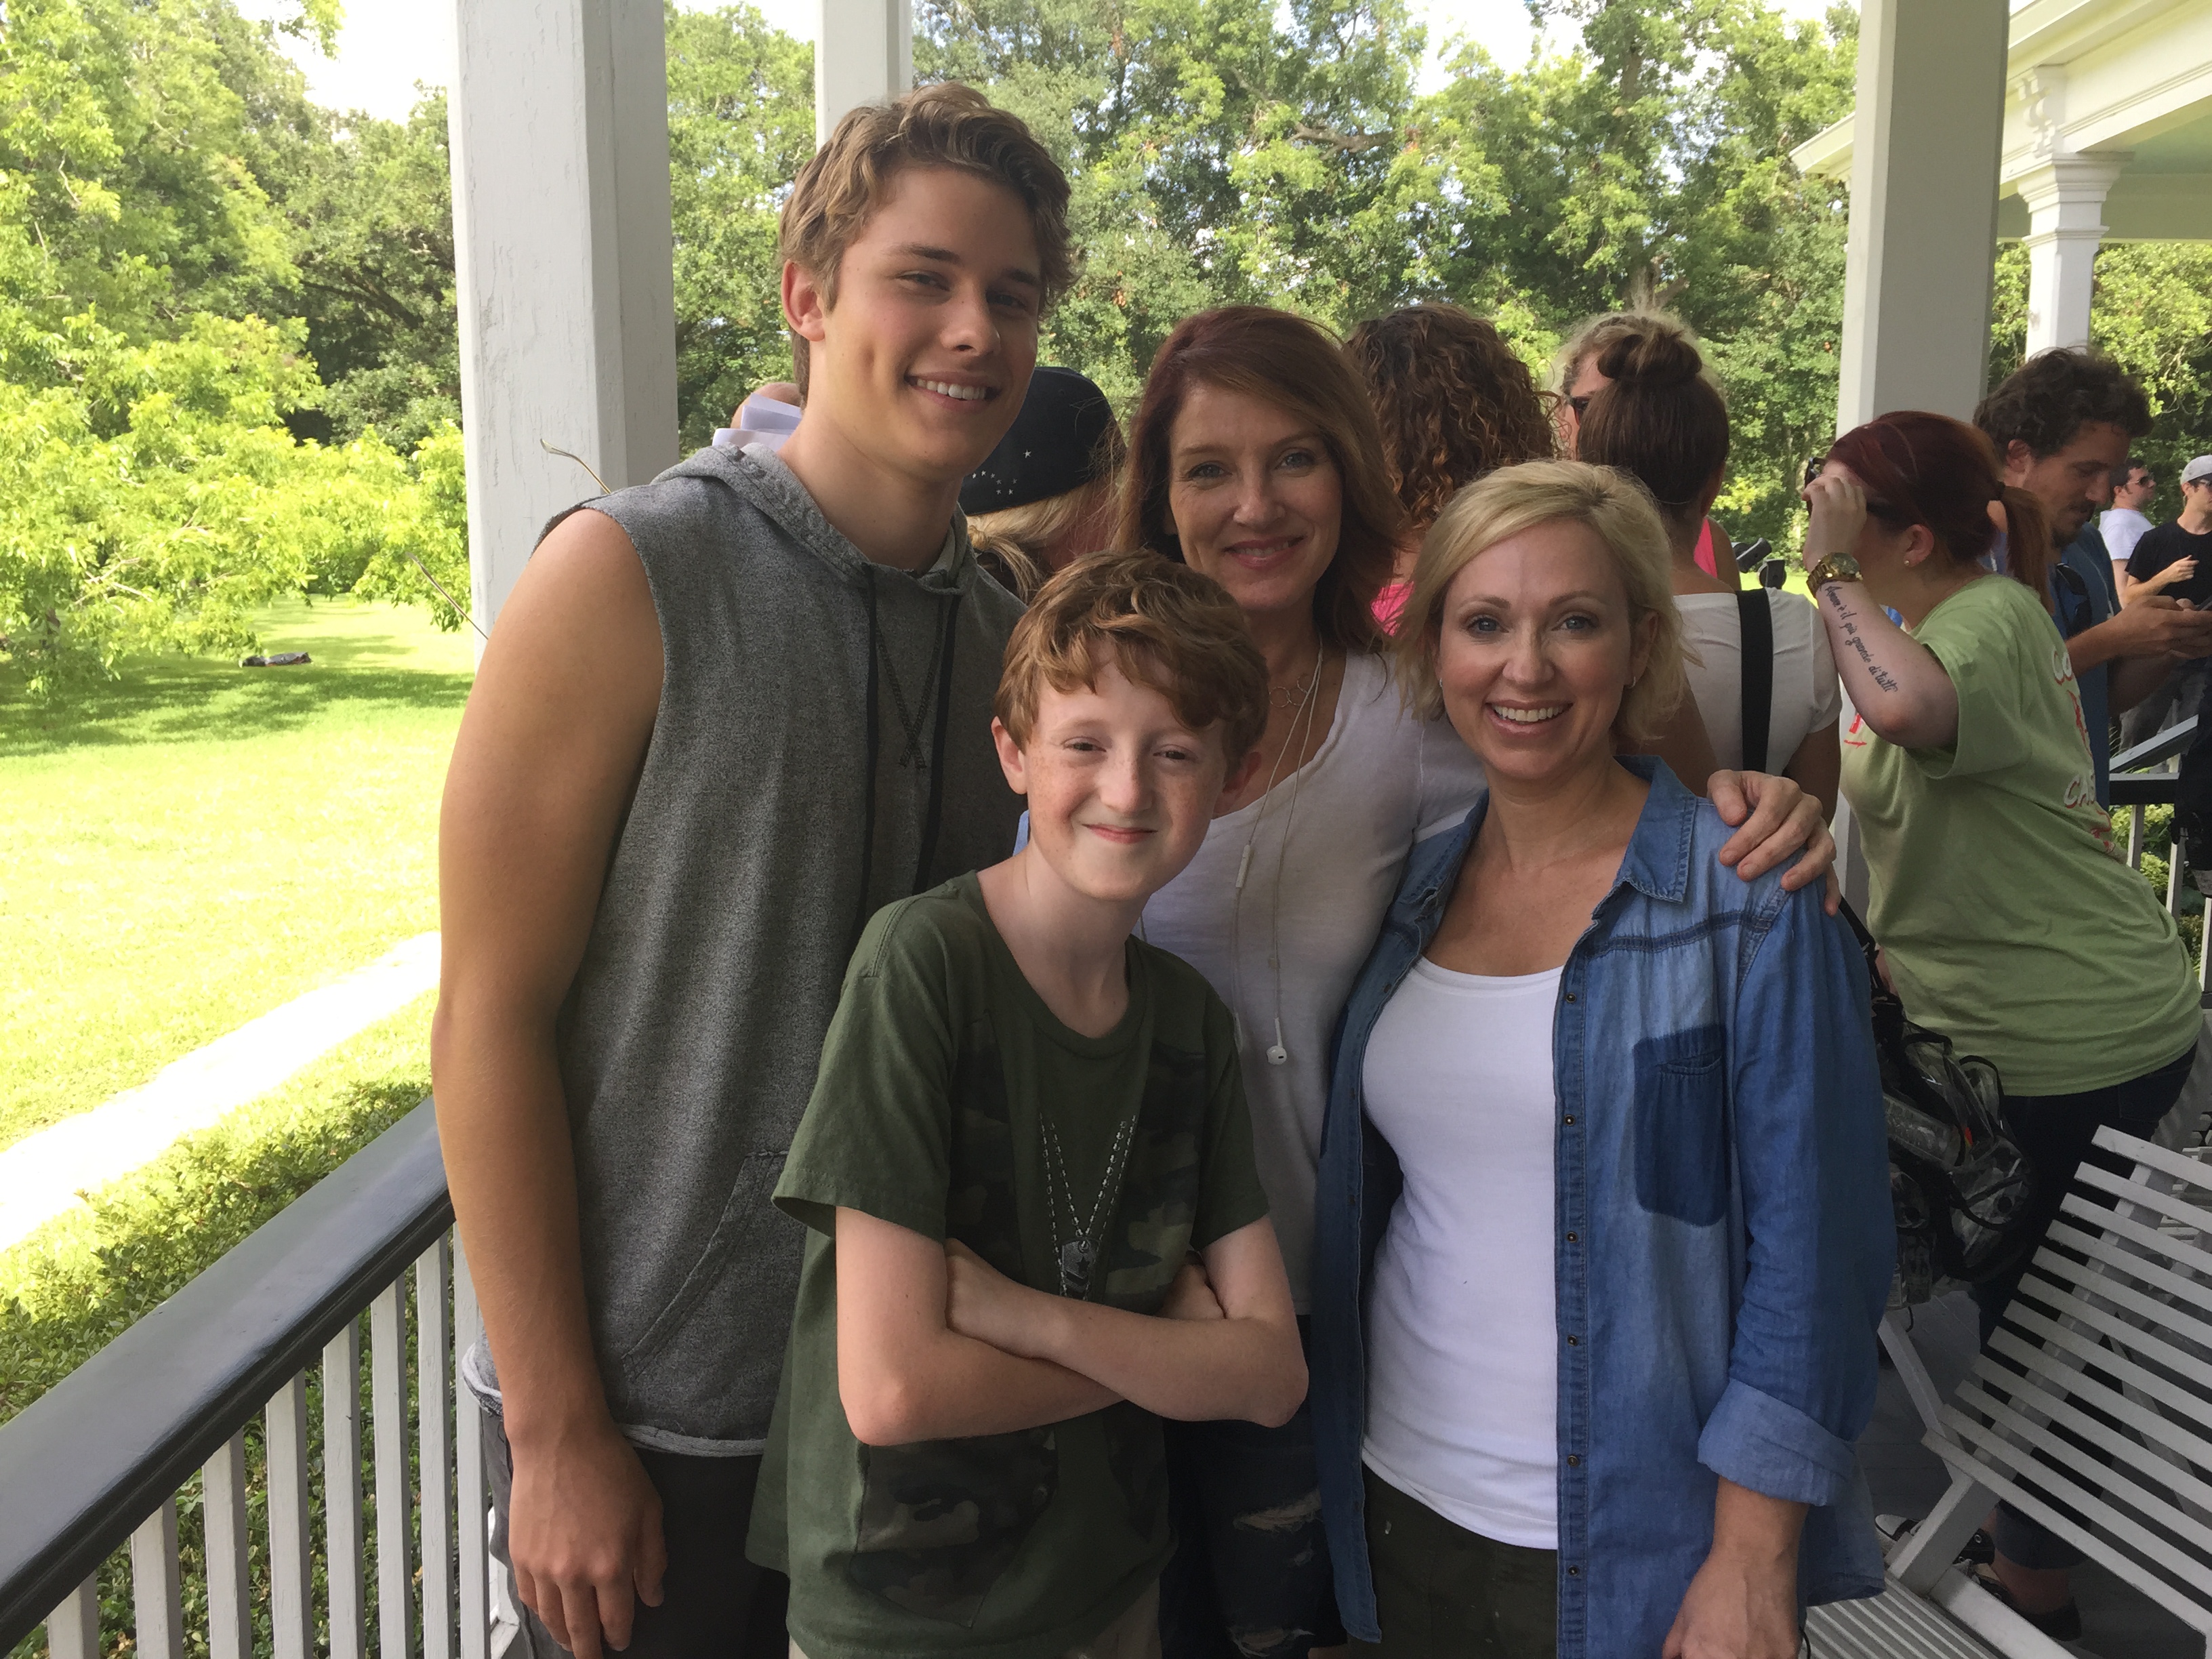 That's a wrap! Camp Cool Kids with Lisa Arnold, Leigh-Allyn Baker and Connor Rosen